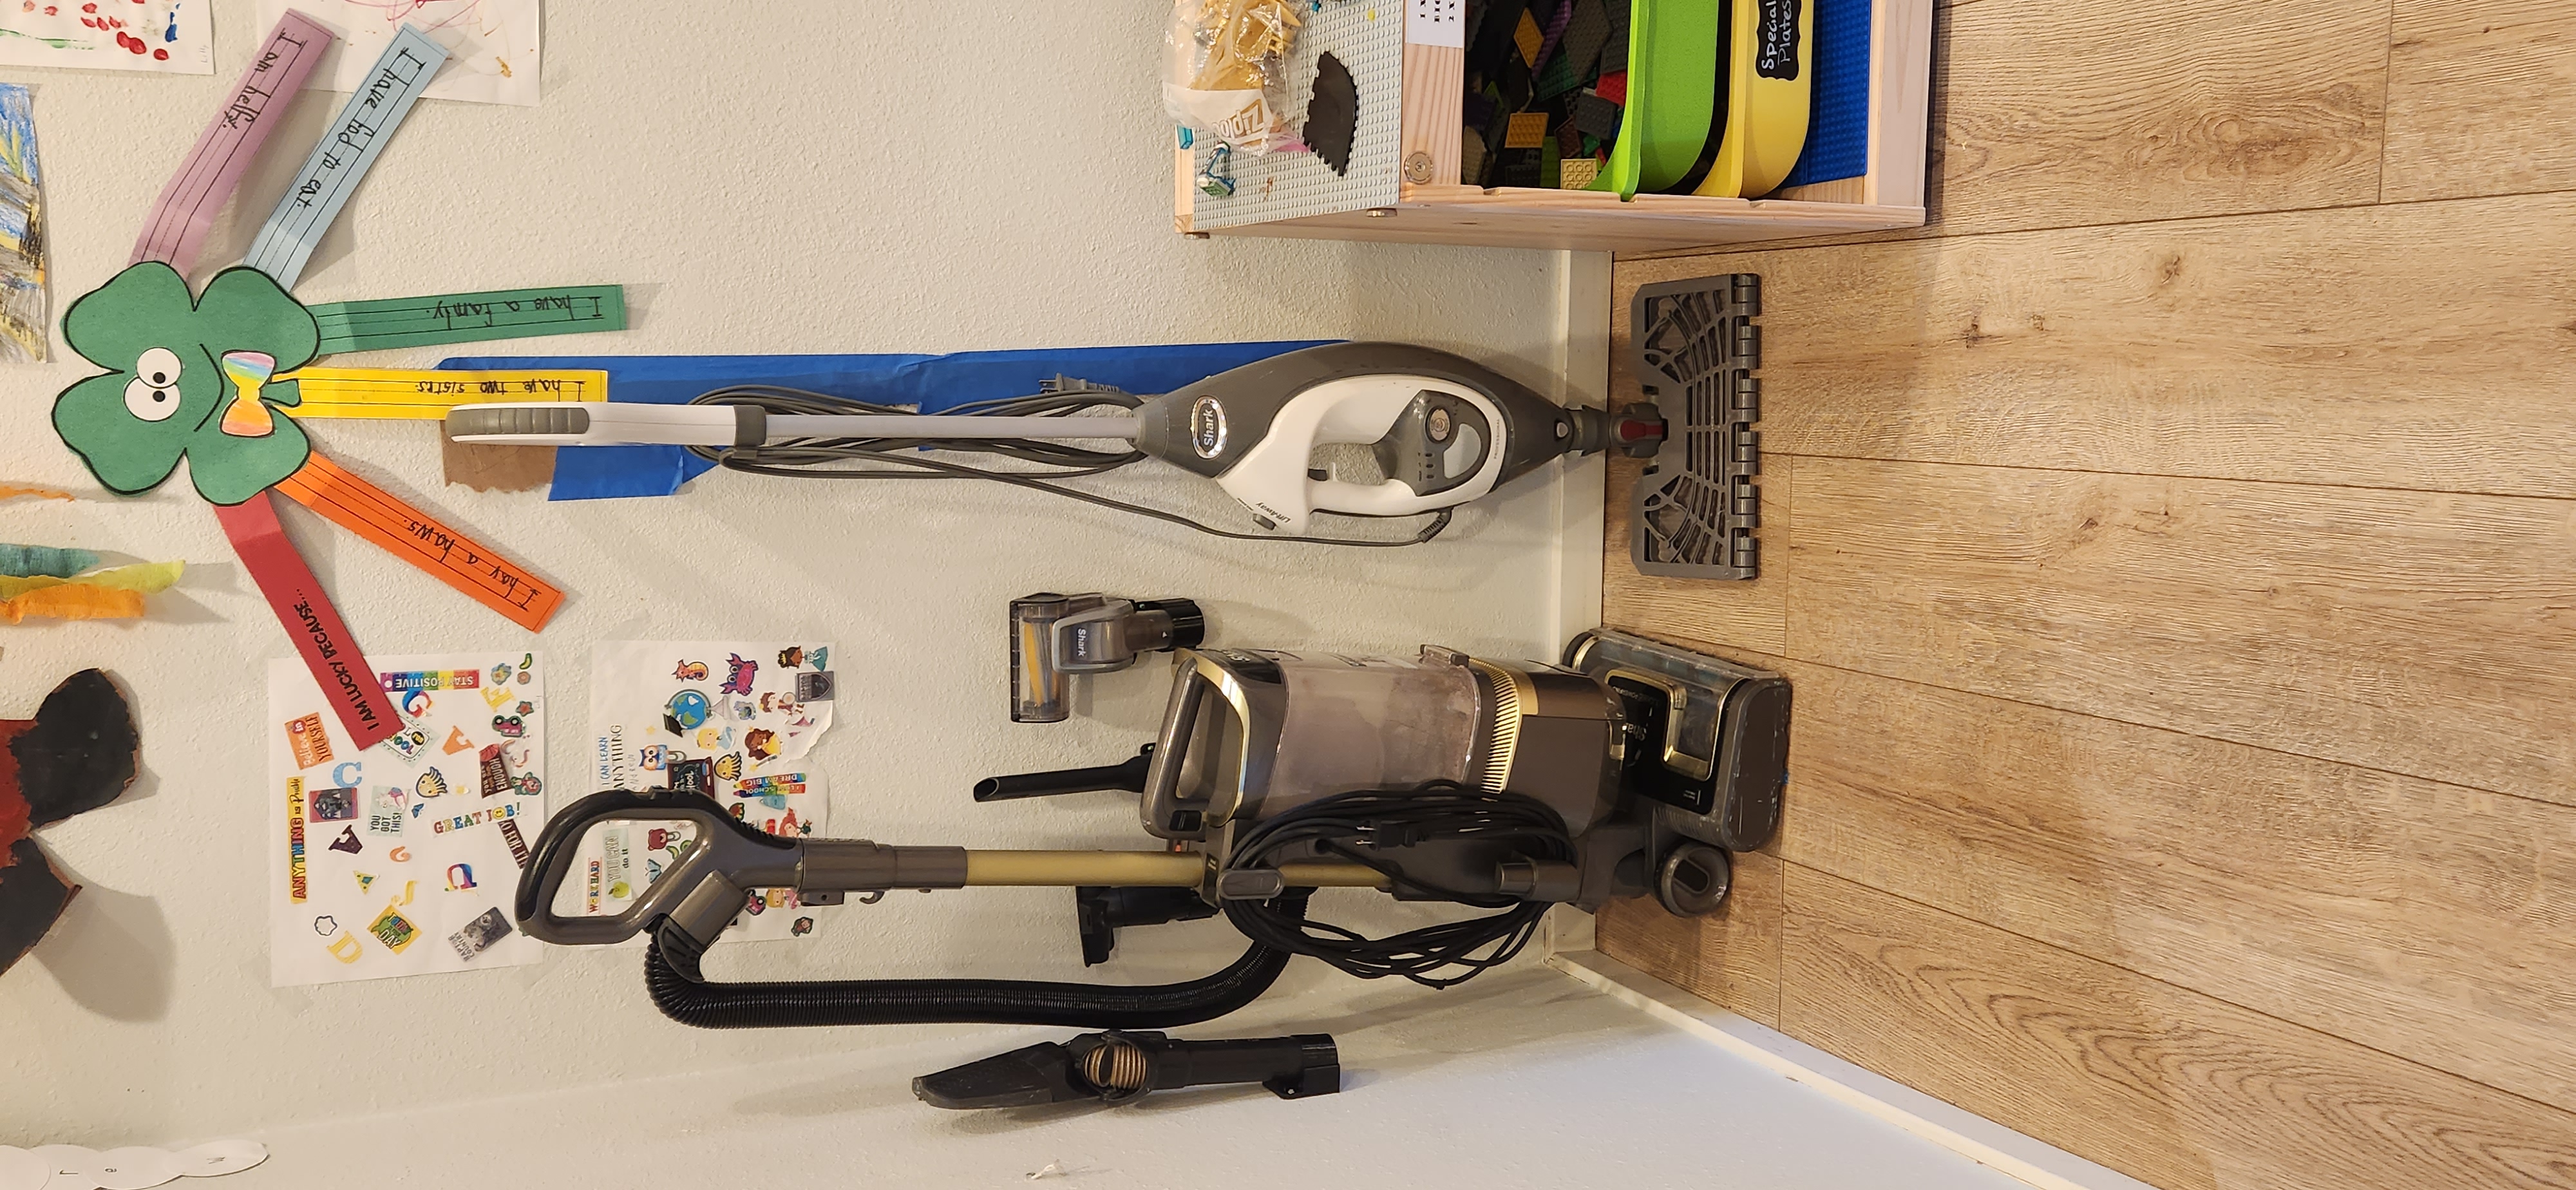 Wall mount Vacuum Attachment Holder